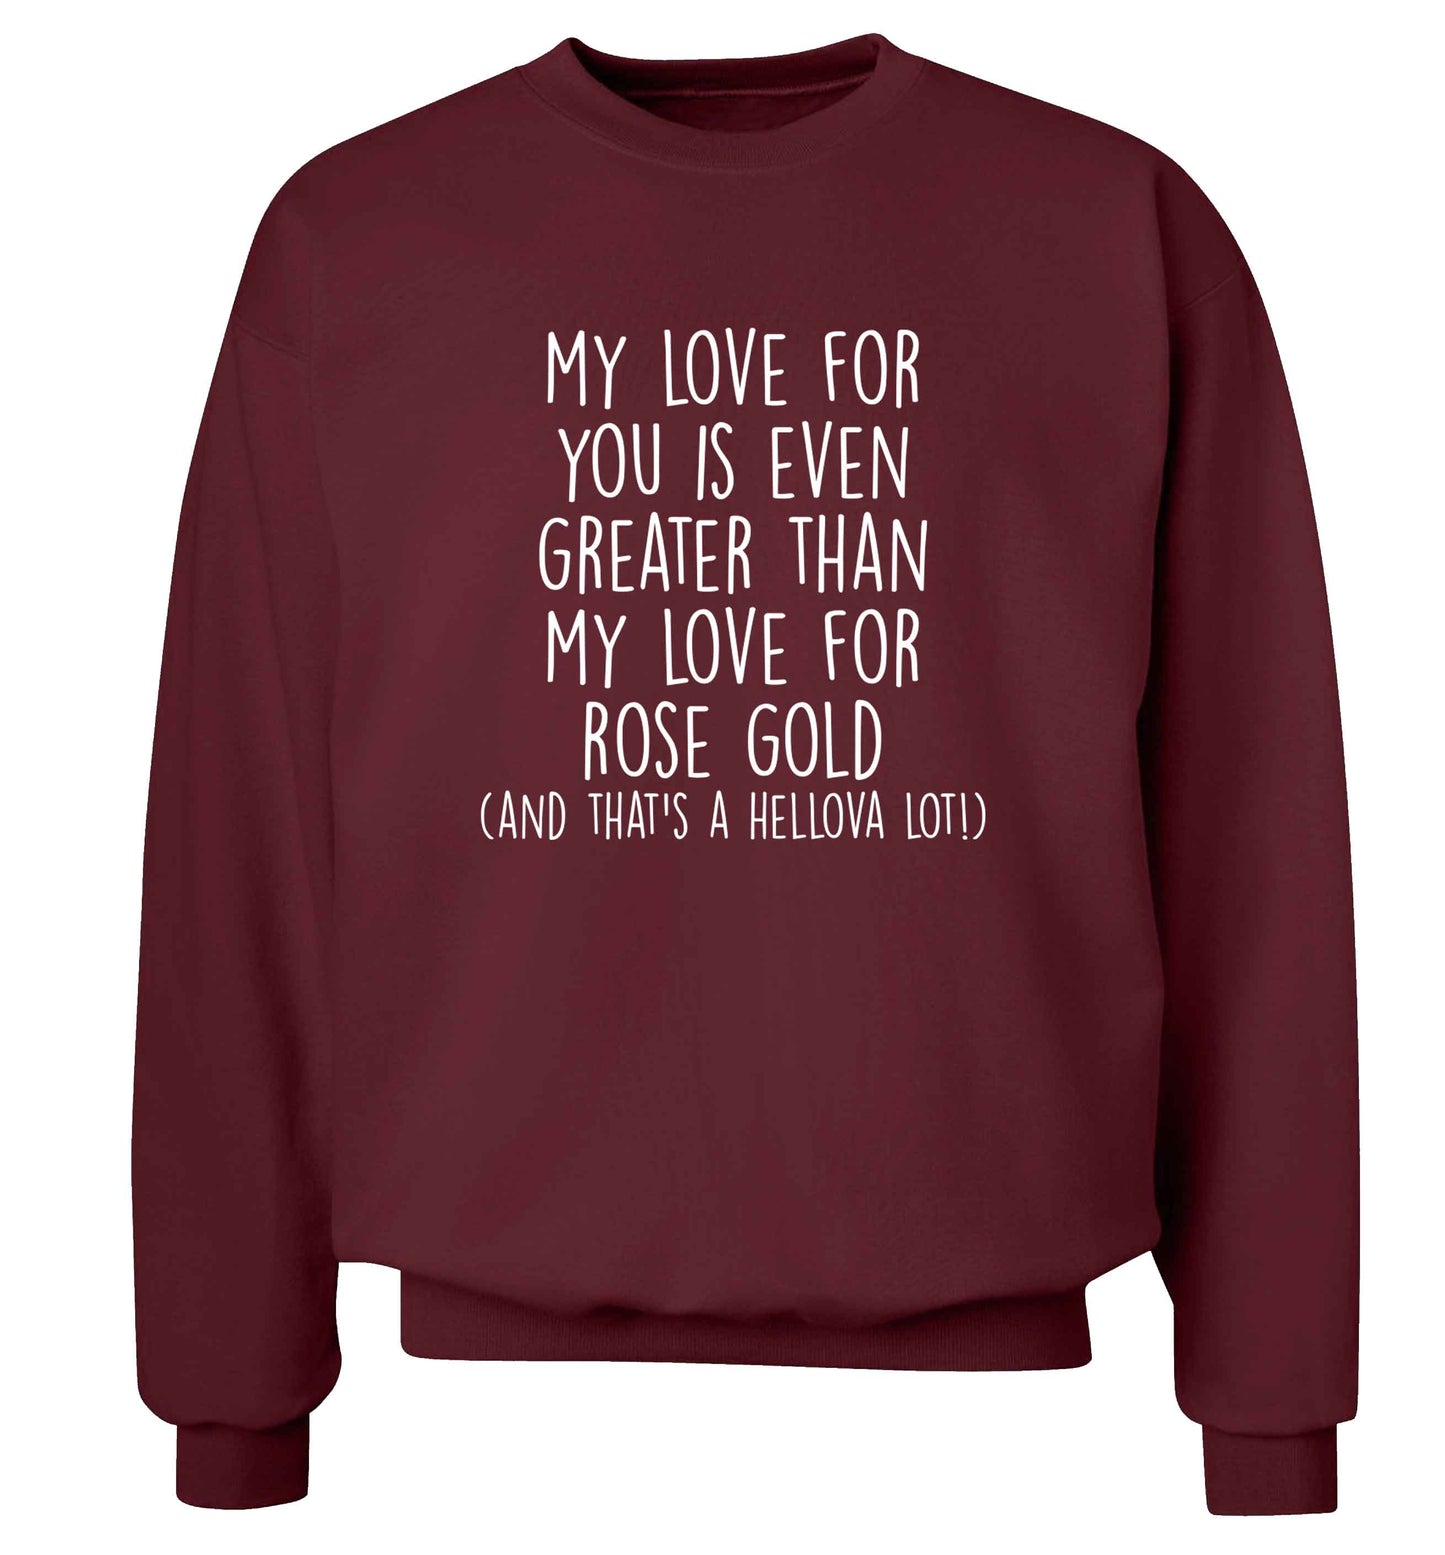 My love for you is even greater than my love for rose gold (and that's a hellova lot) adult's unisex maroon sweater 2XL